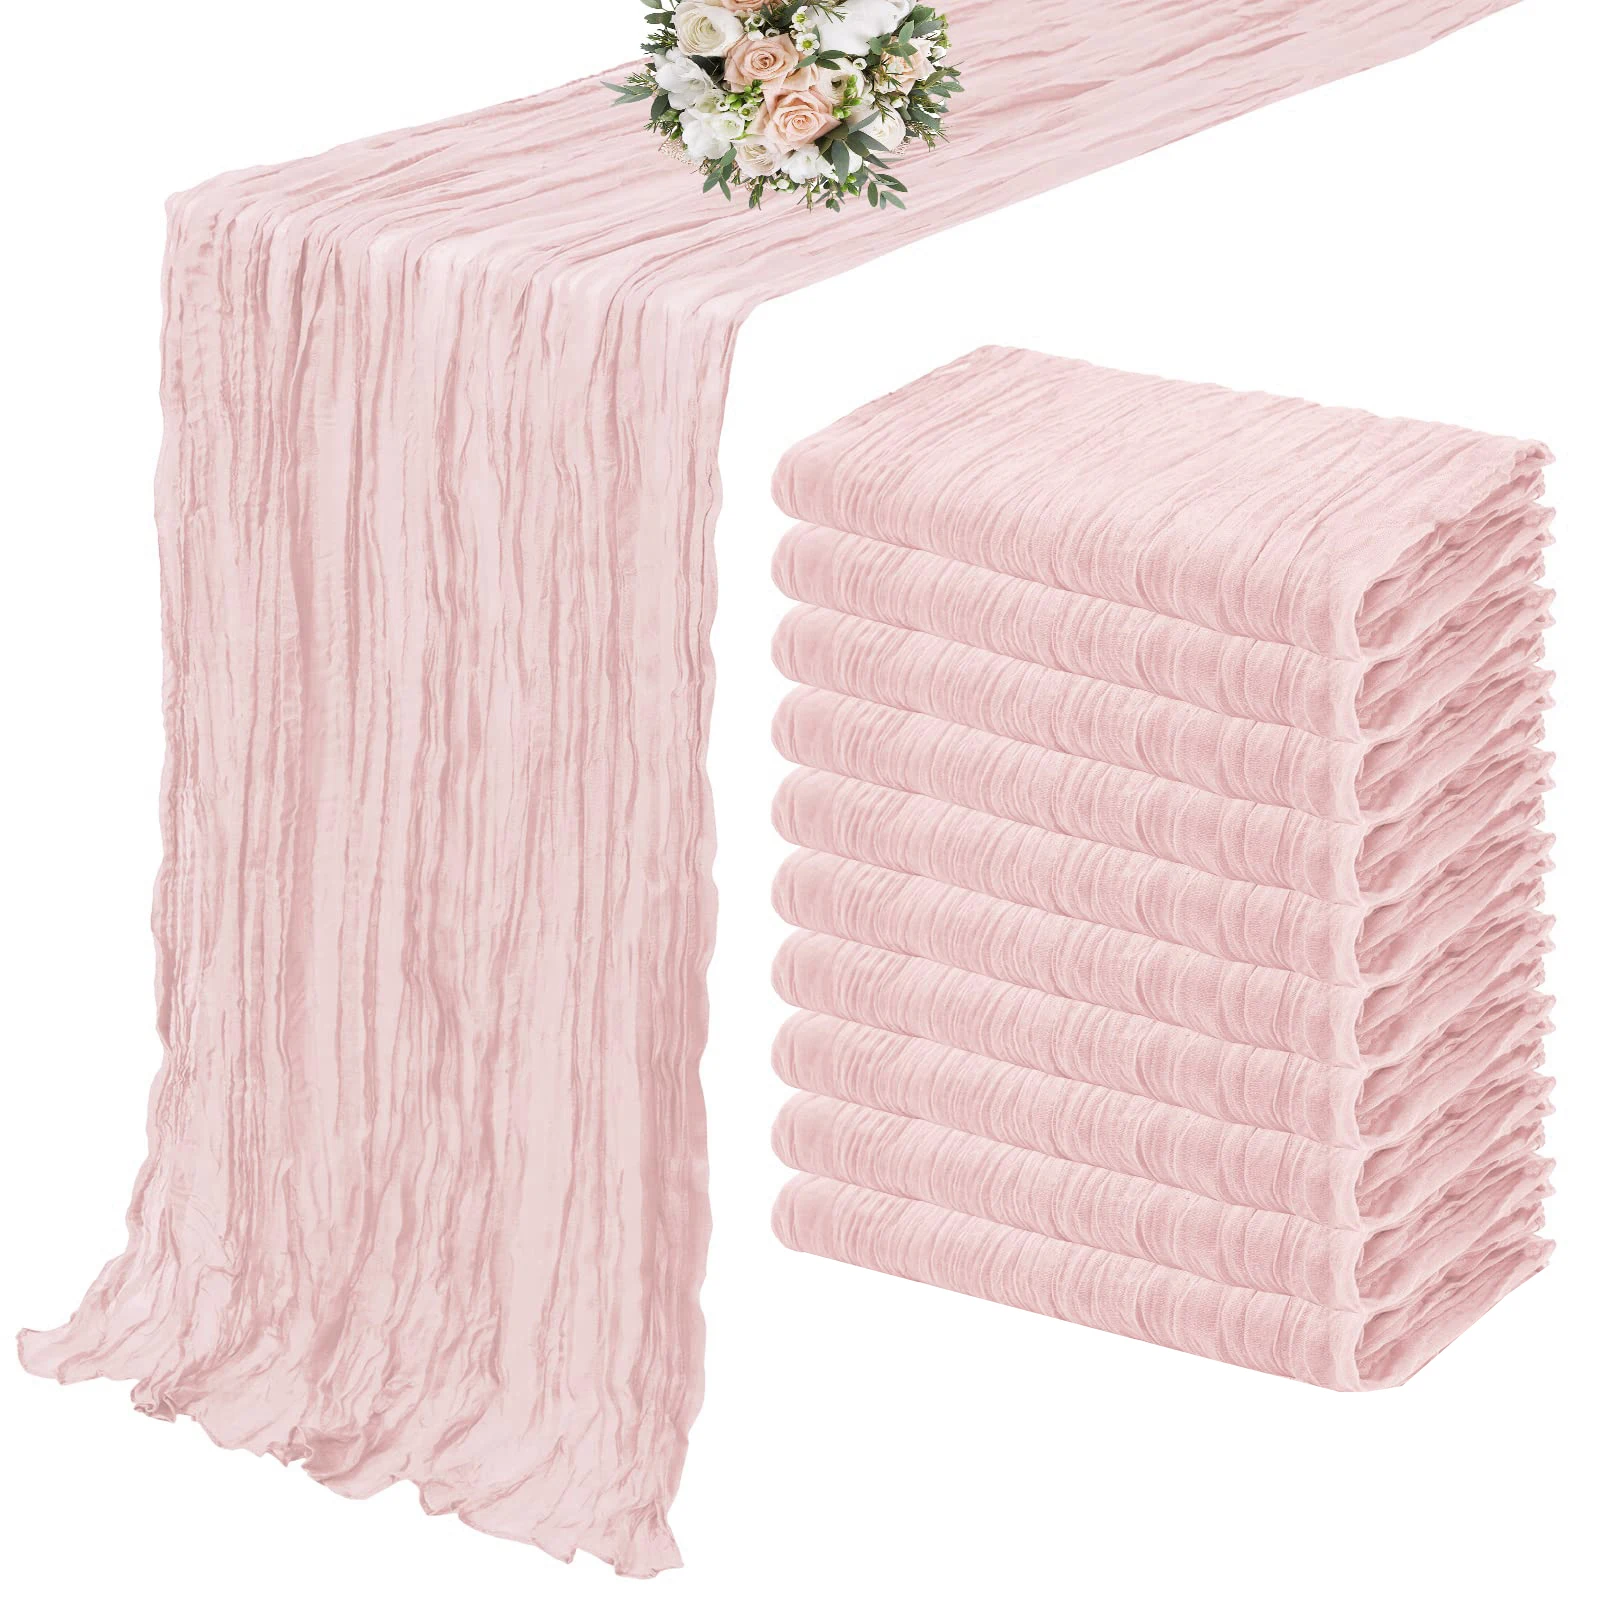 

10PCS Set Semi-Sheer Gauze Wedding Table Runner Dirty pink Cheesecloth Table Dining Party Christmas Banquets Arches Cake Decor